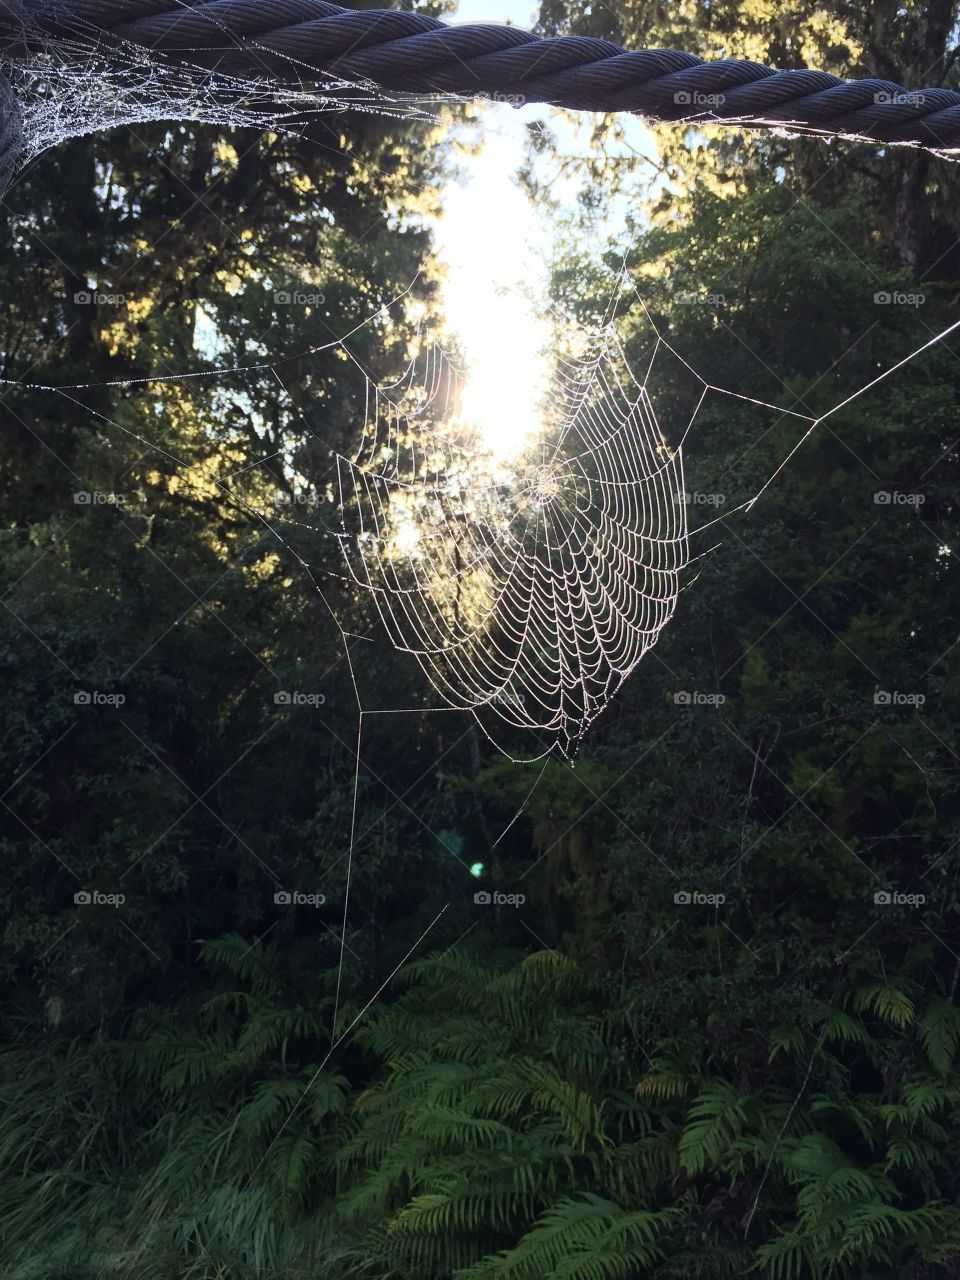 Spider web still a bit wet from the morning dew, allowing it to glisten in the sun.